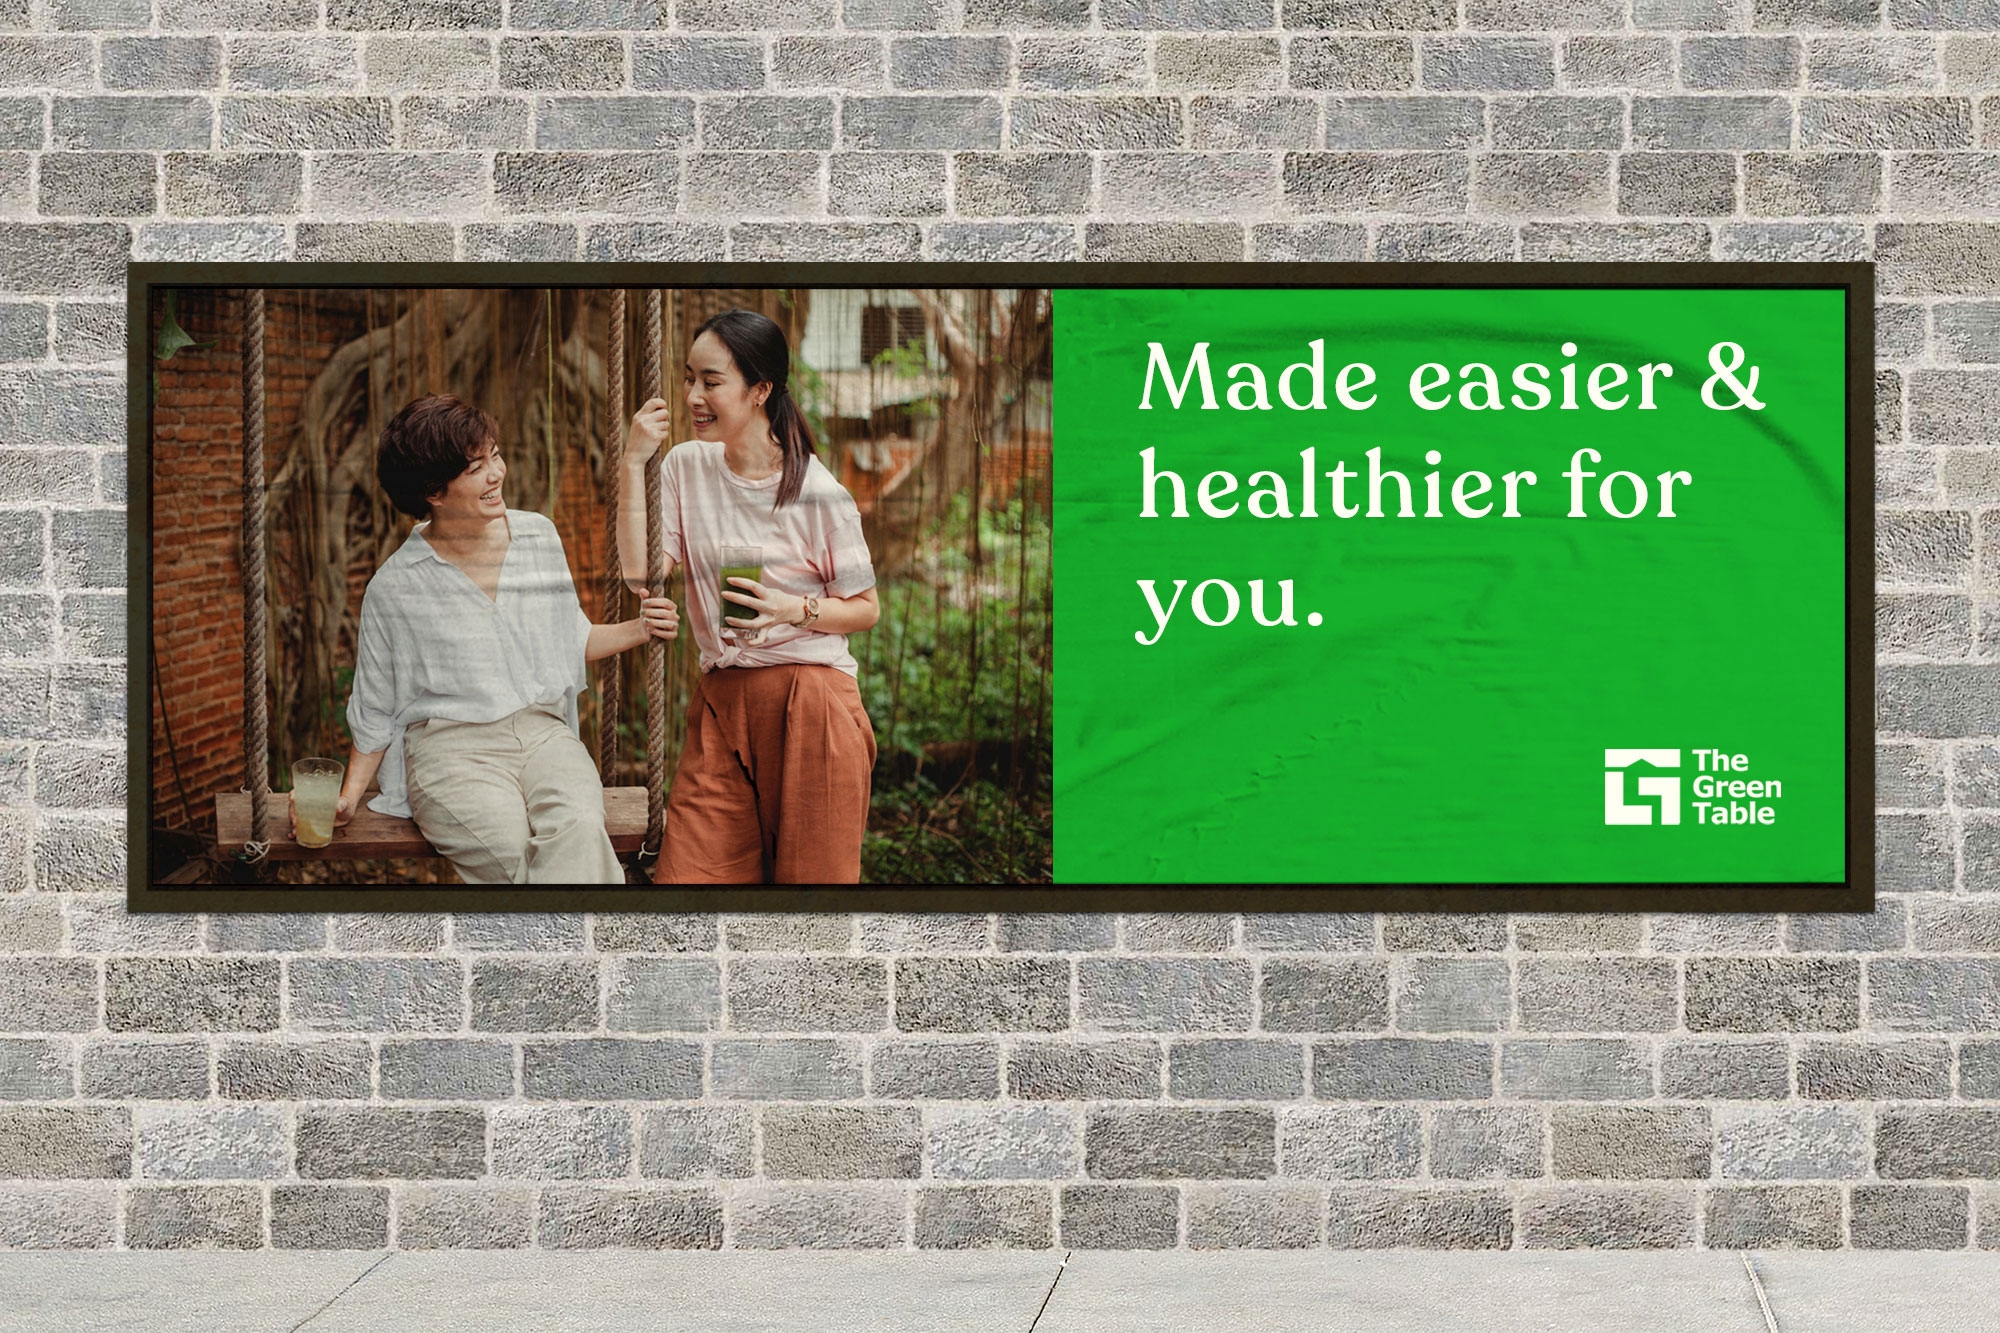 The Green Table Ph - Made easier & healthier for you - Billboard